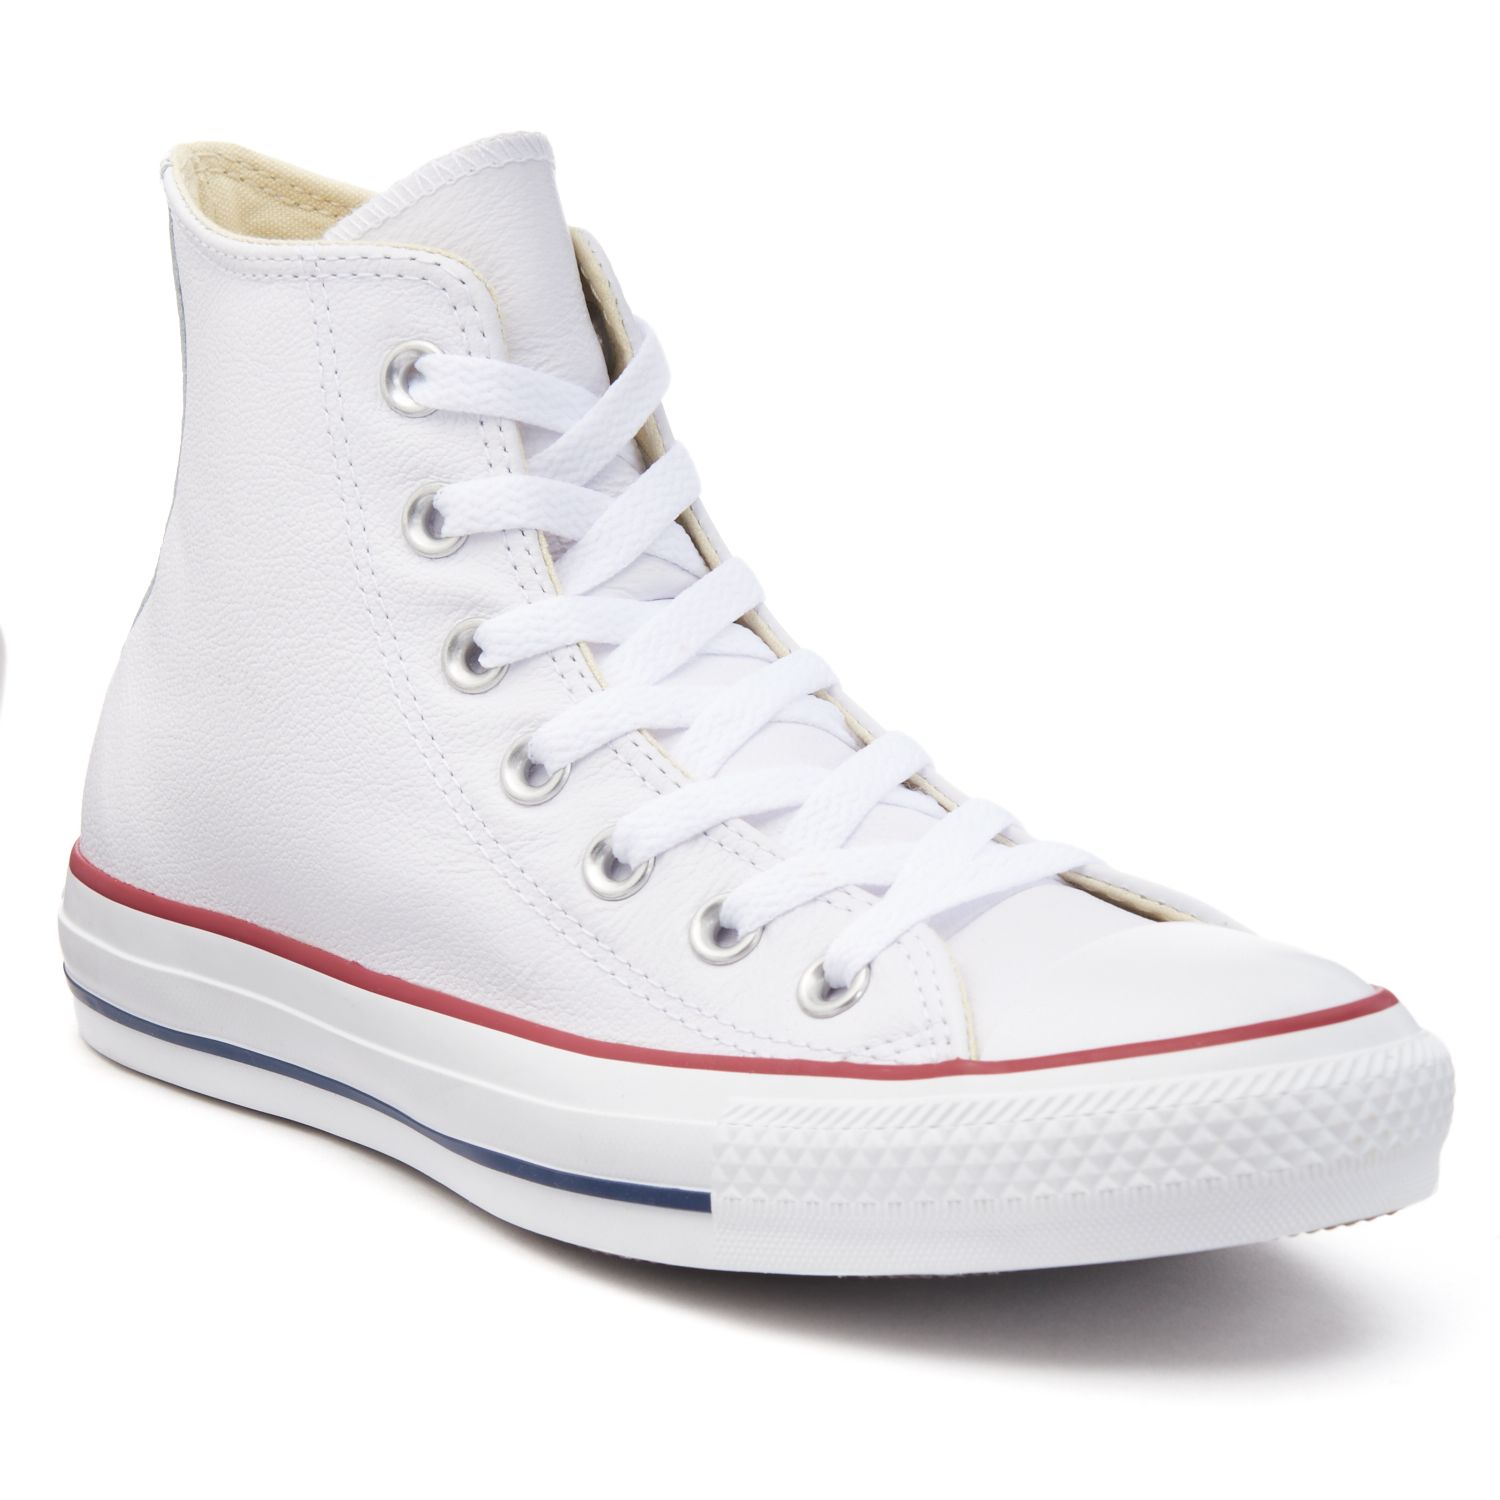 leather chuck taylor high tops